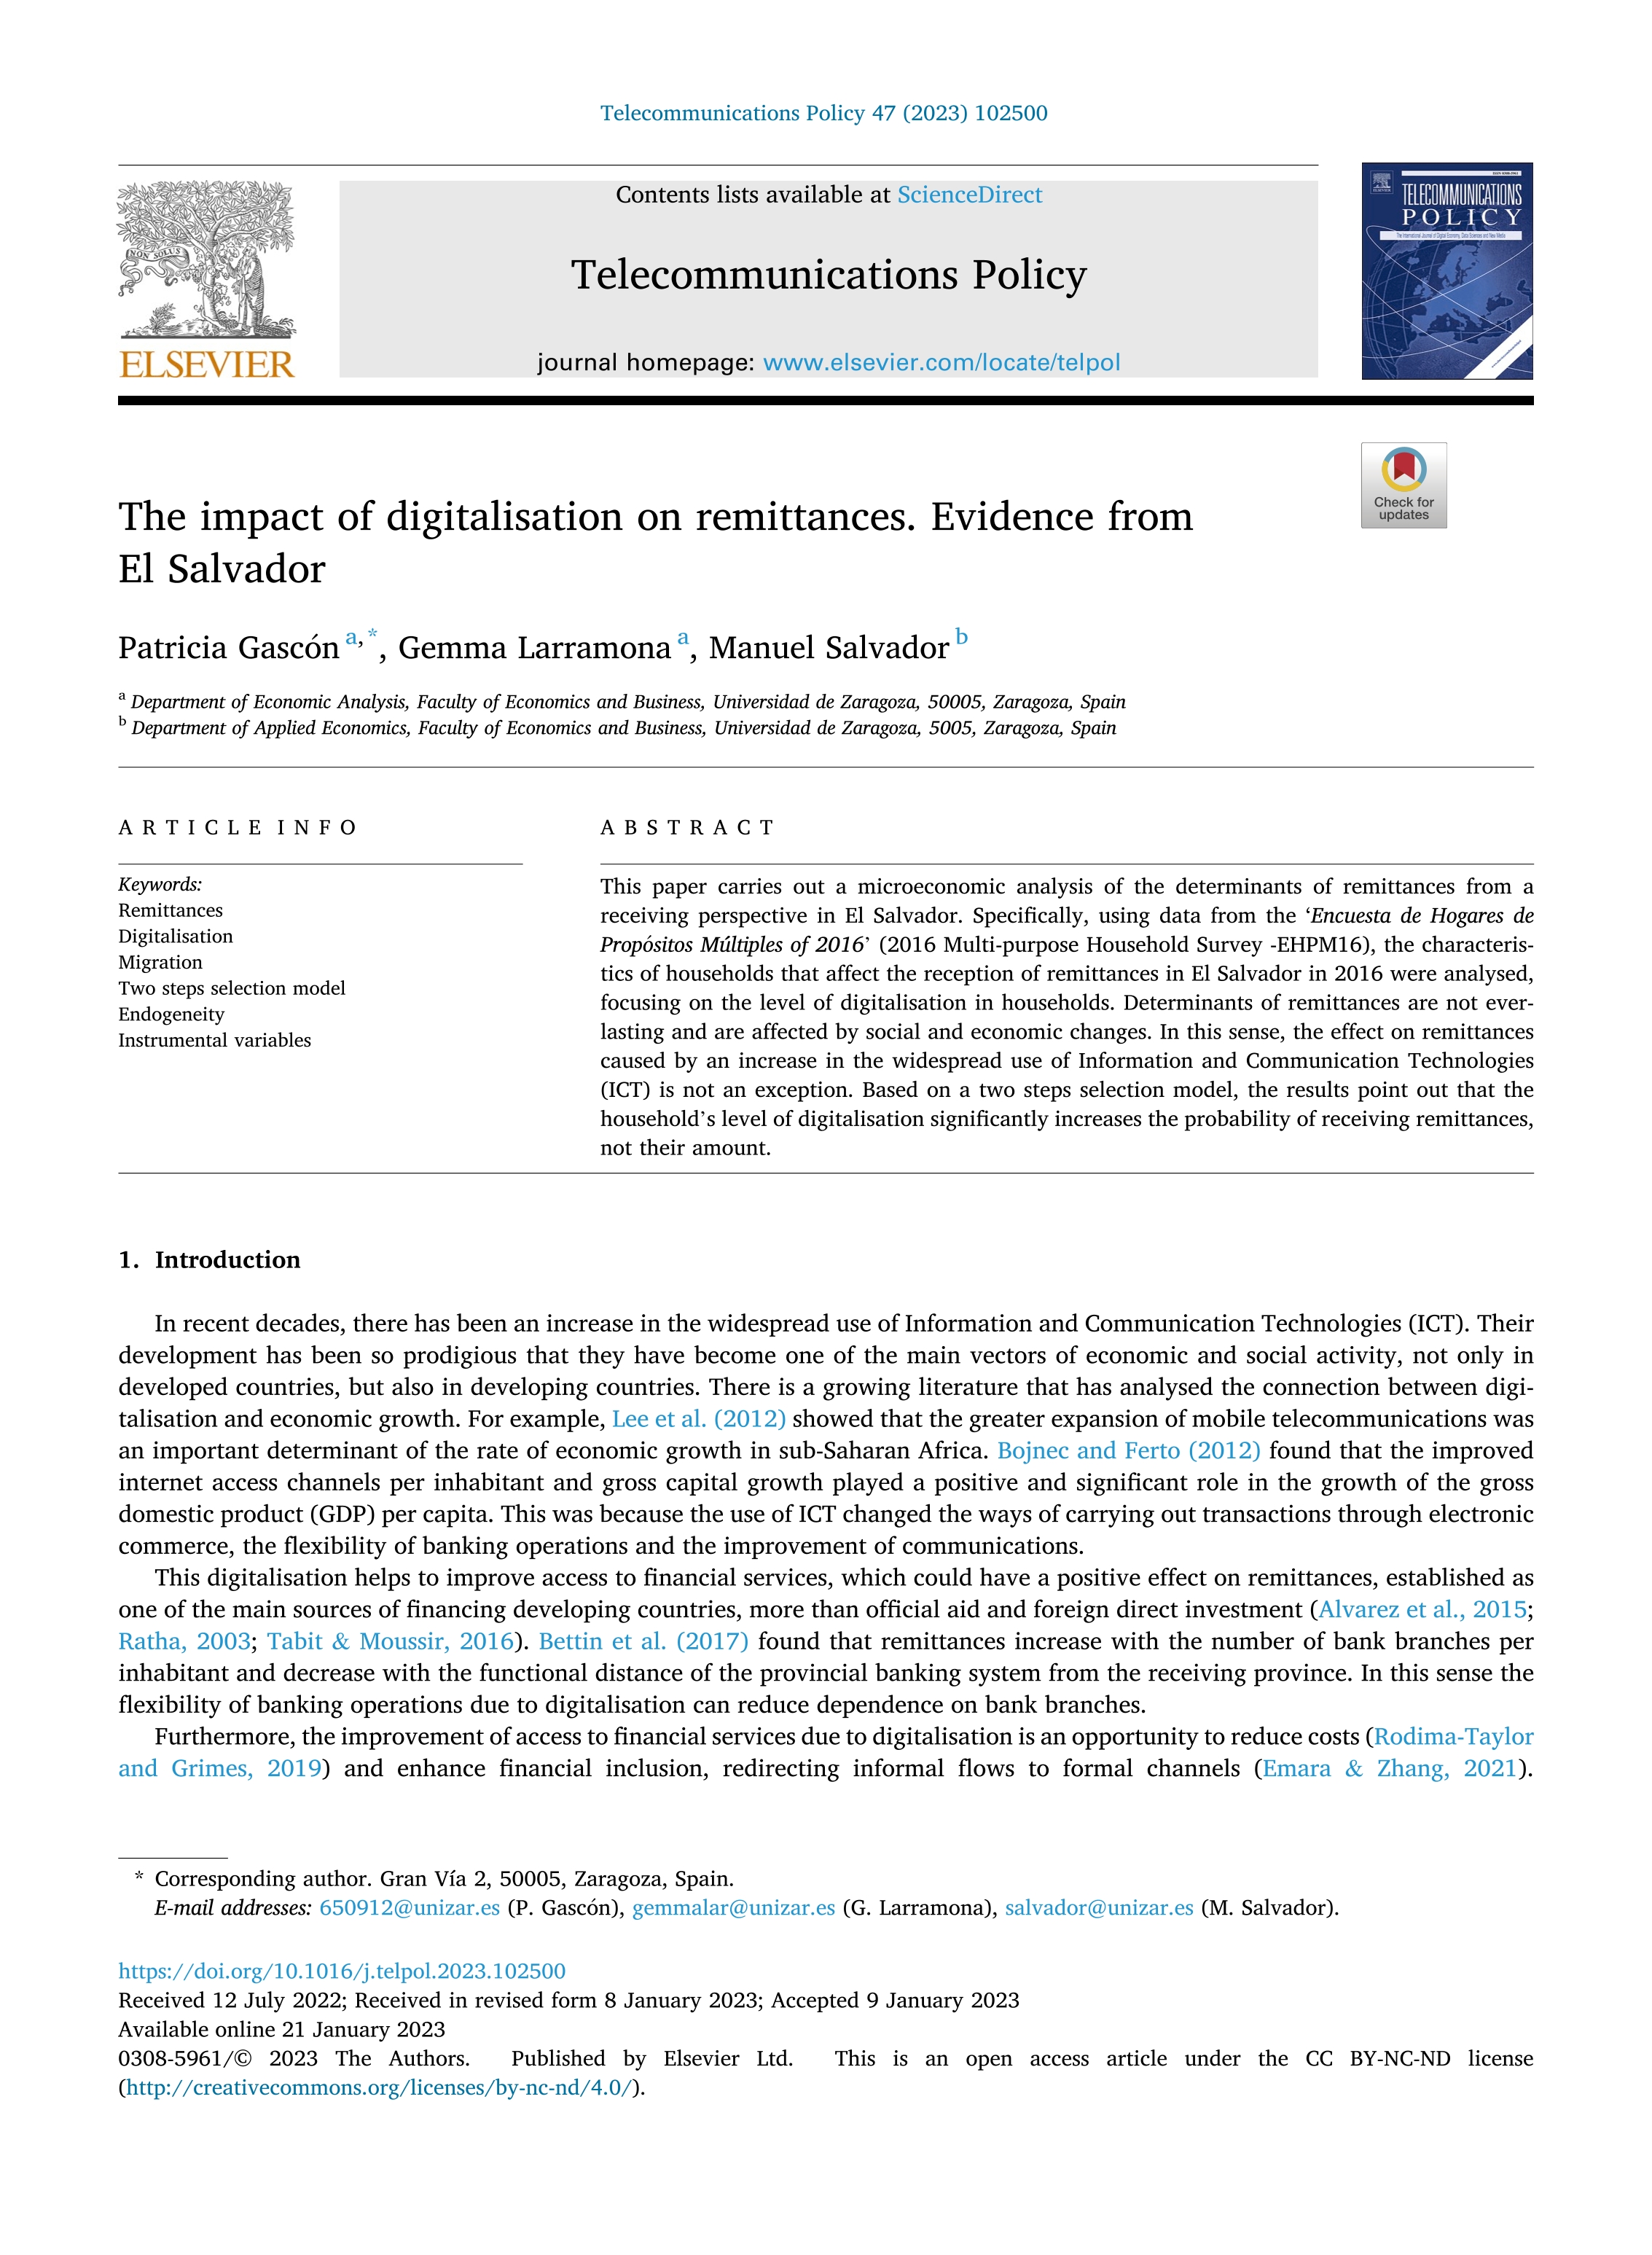 The impact of digitalisation on remittances. Evidence from El Salvador